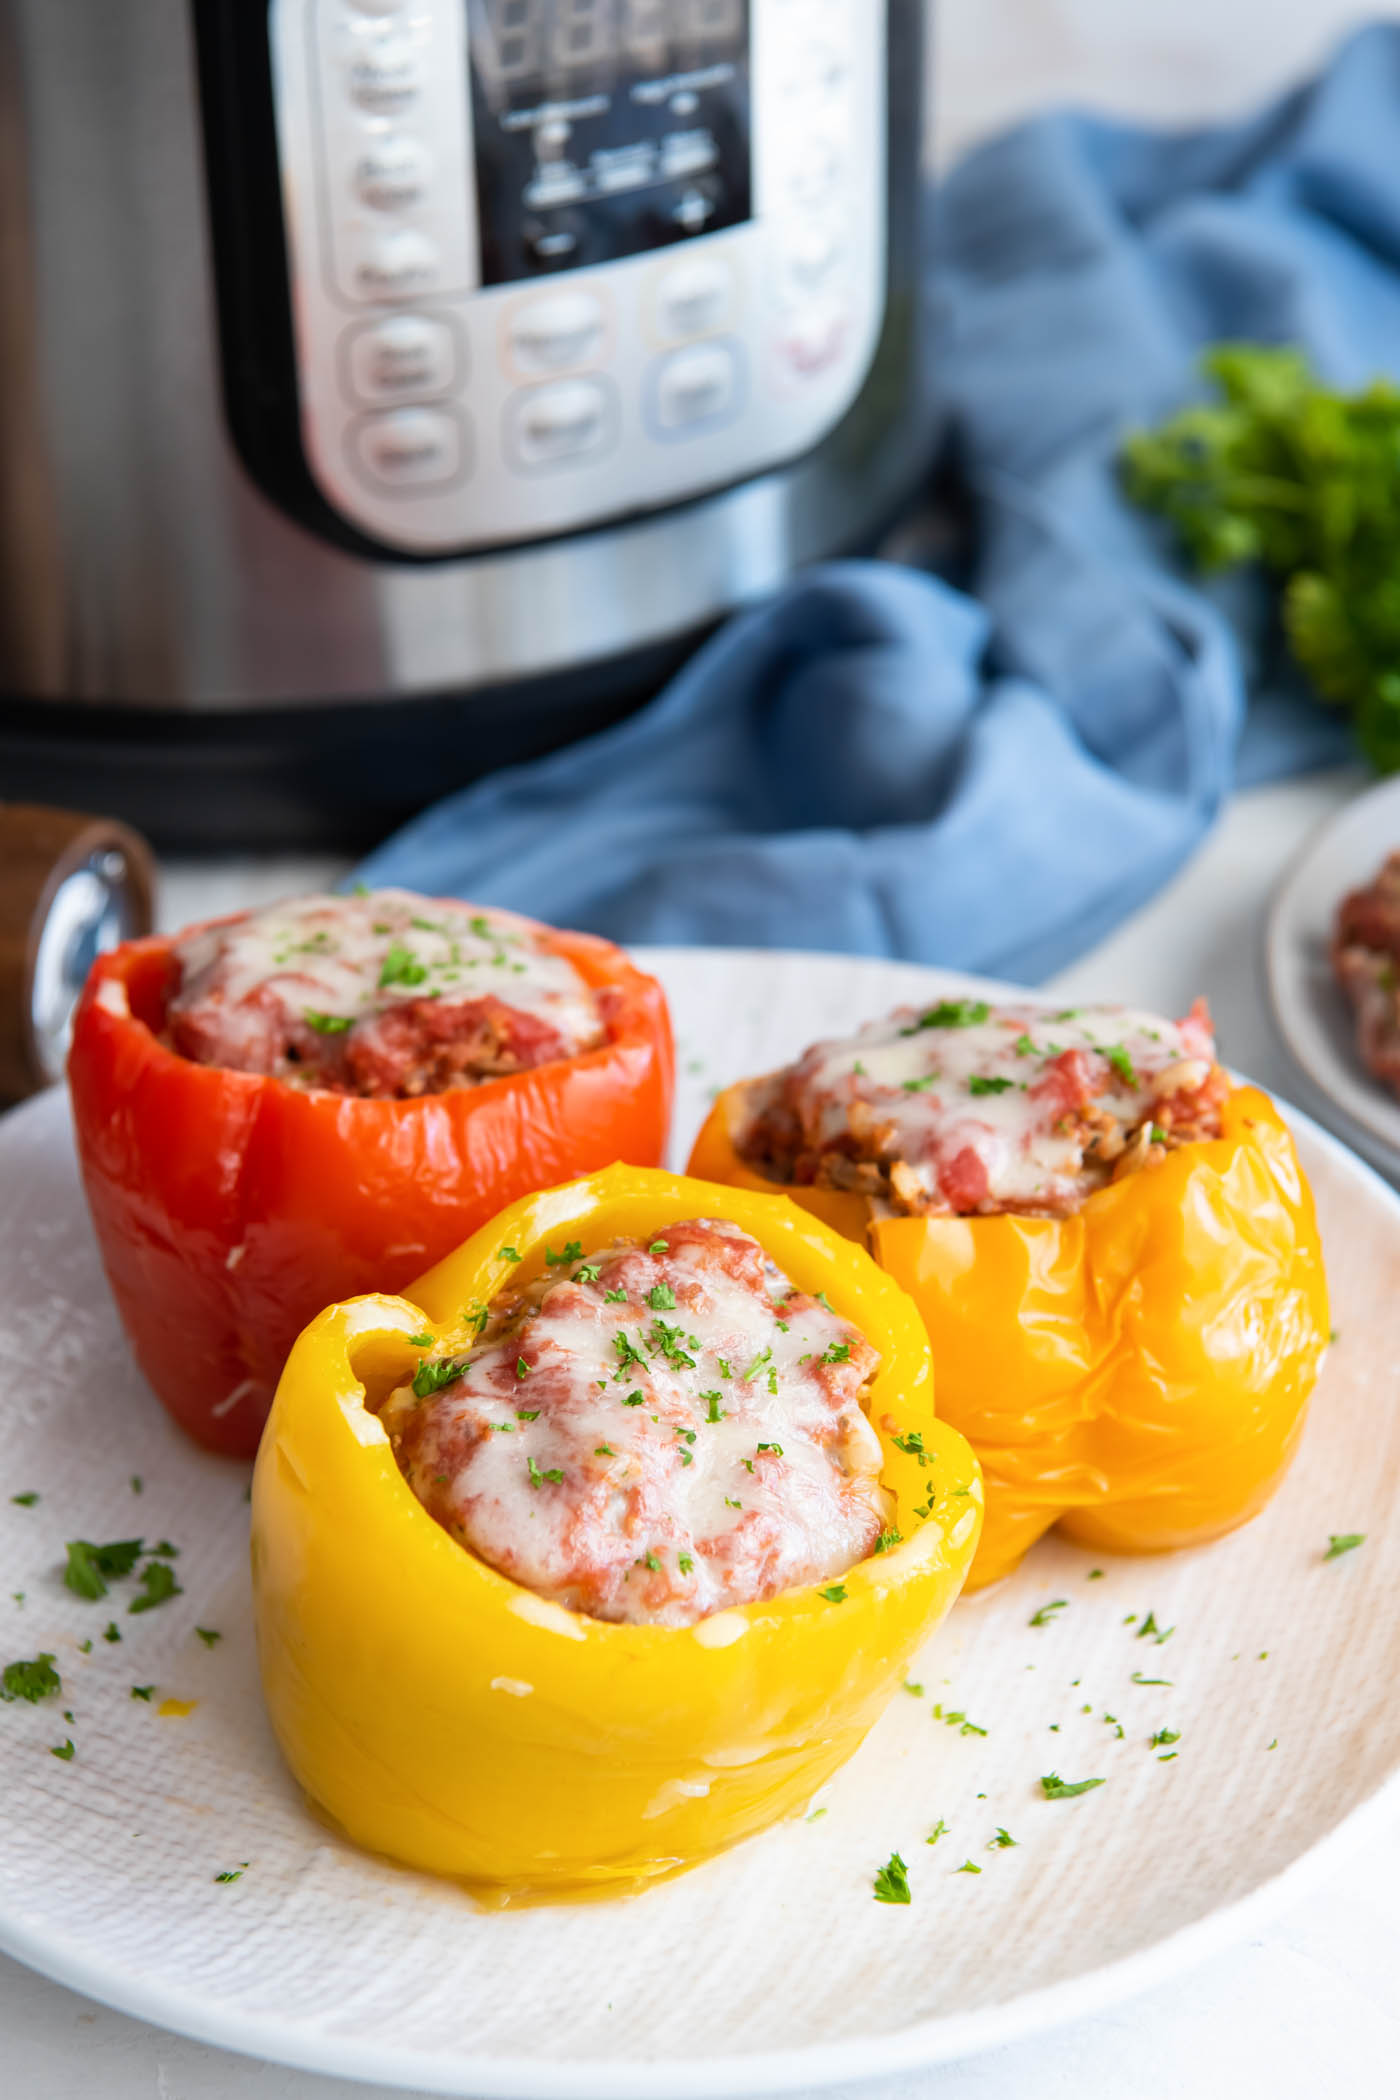 Three stuffed peppers on a plate with instant pot in the background.